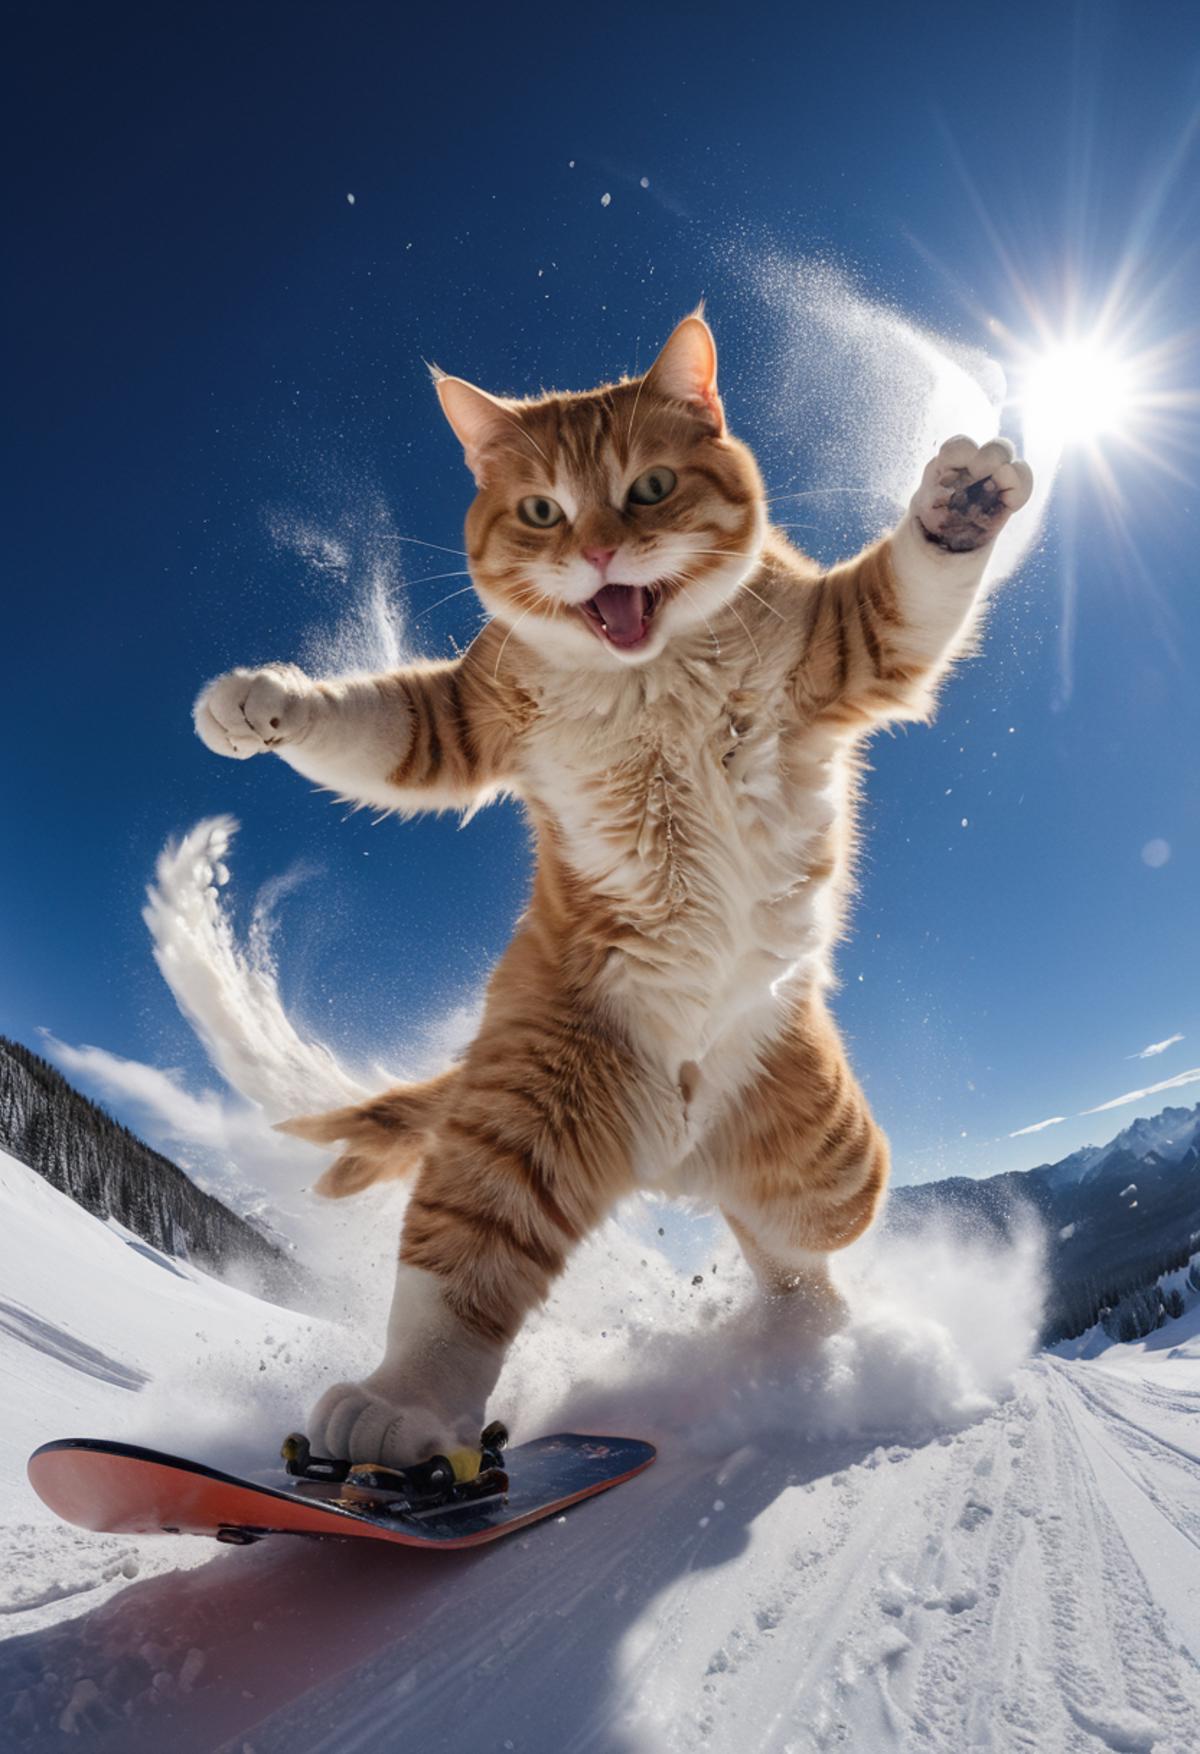 A cat snowboarding in the snow.